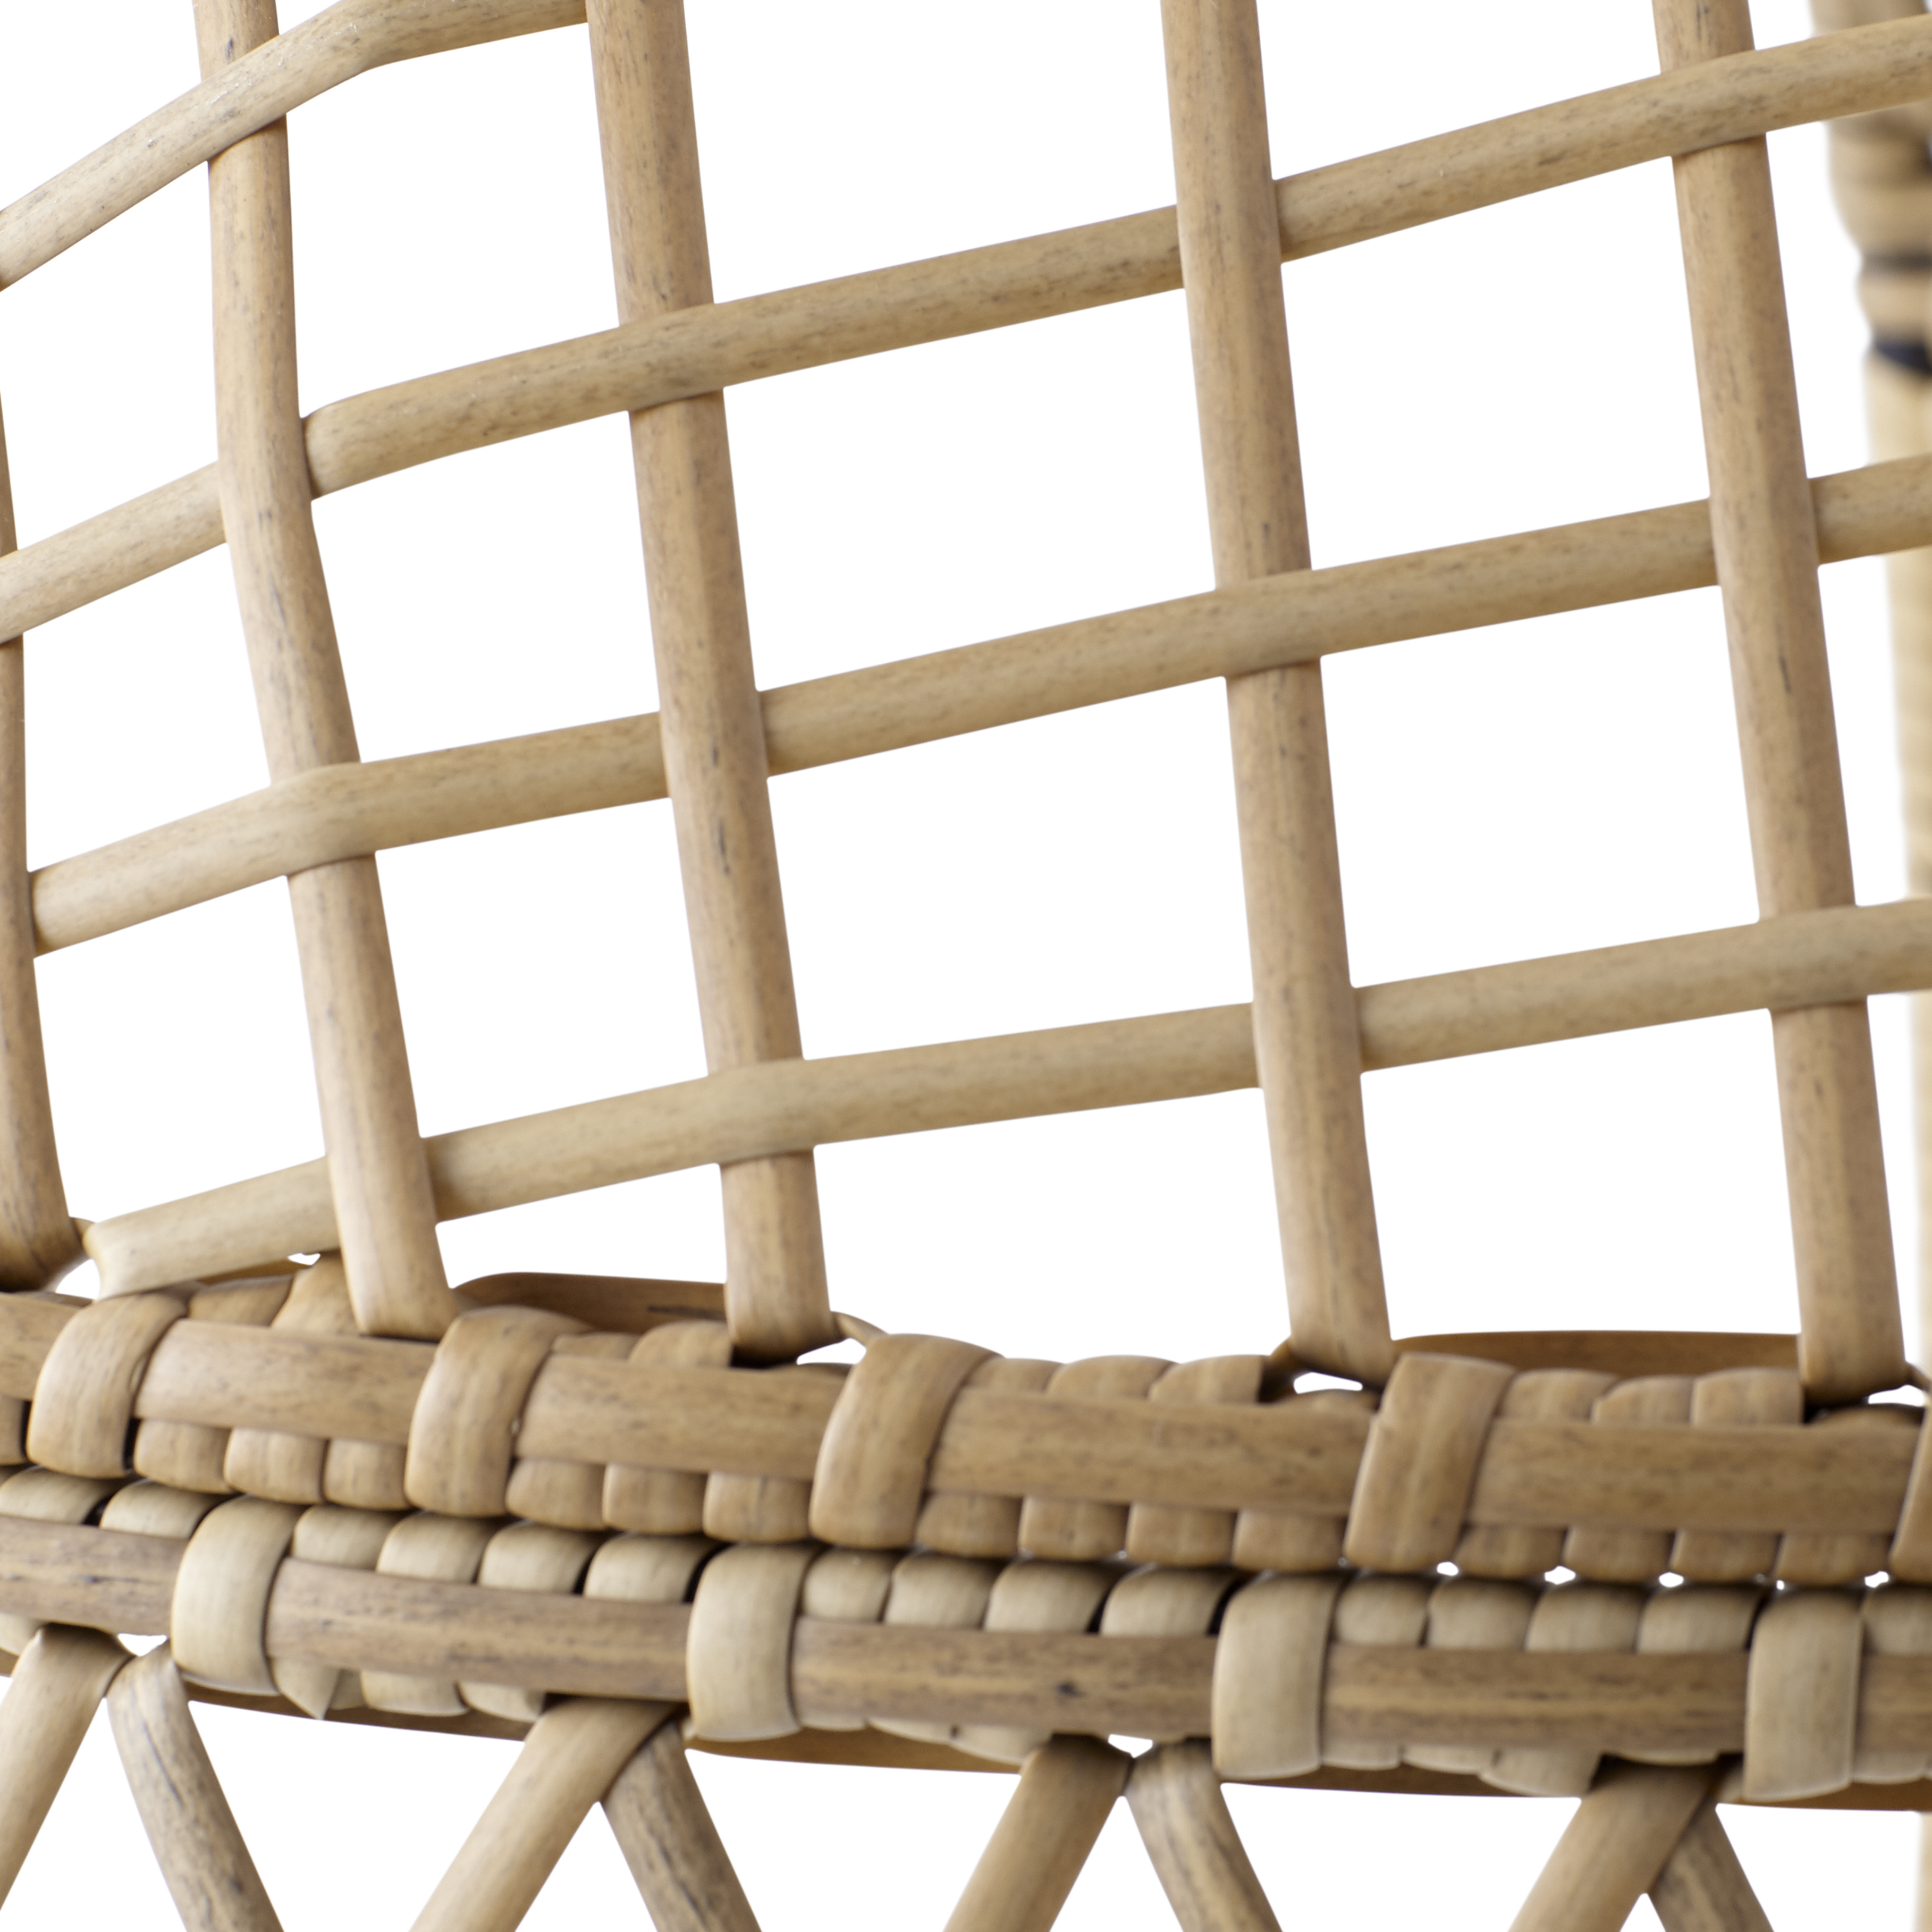 Better Homes & Gardens Kid's Ventura Outdoor Wicker Stationary Egg Chair with Cream Cushions - image 4 of 8